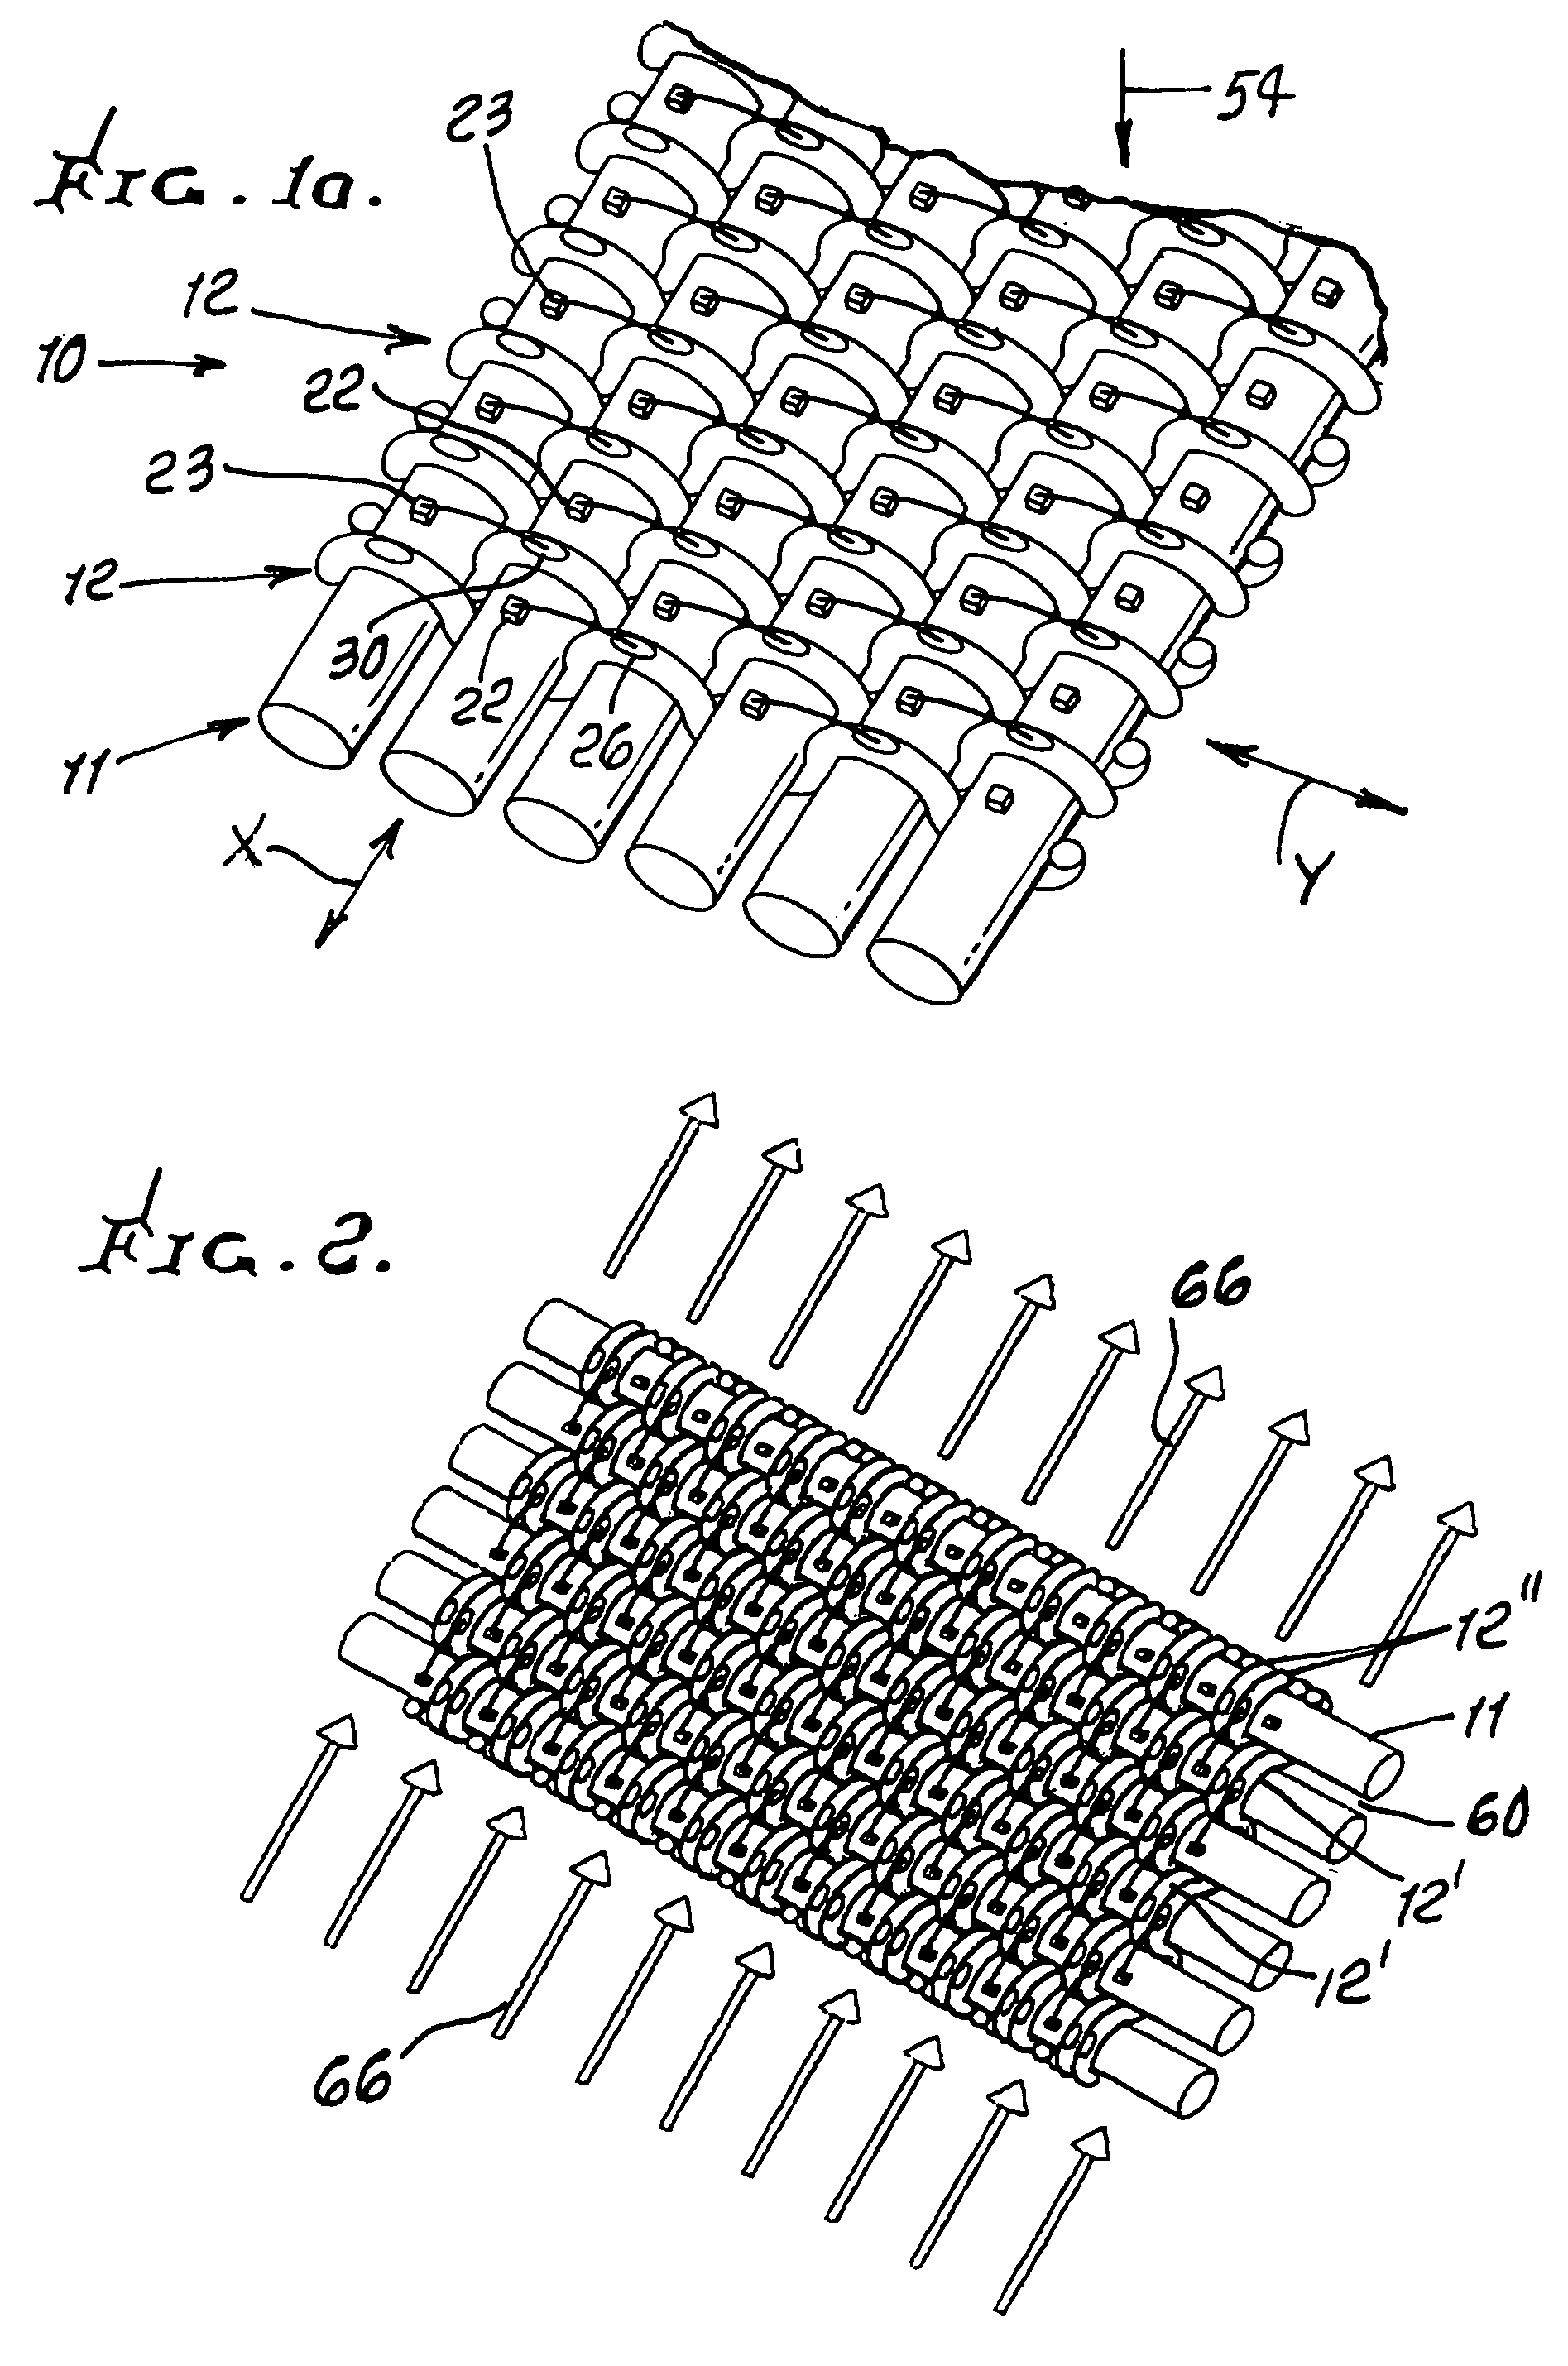 Electronic assembly/system with reduced cost, mass, and volume and increased efficiency and power density